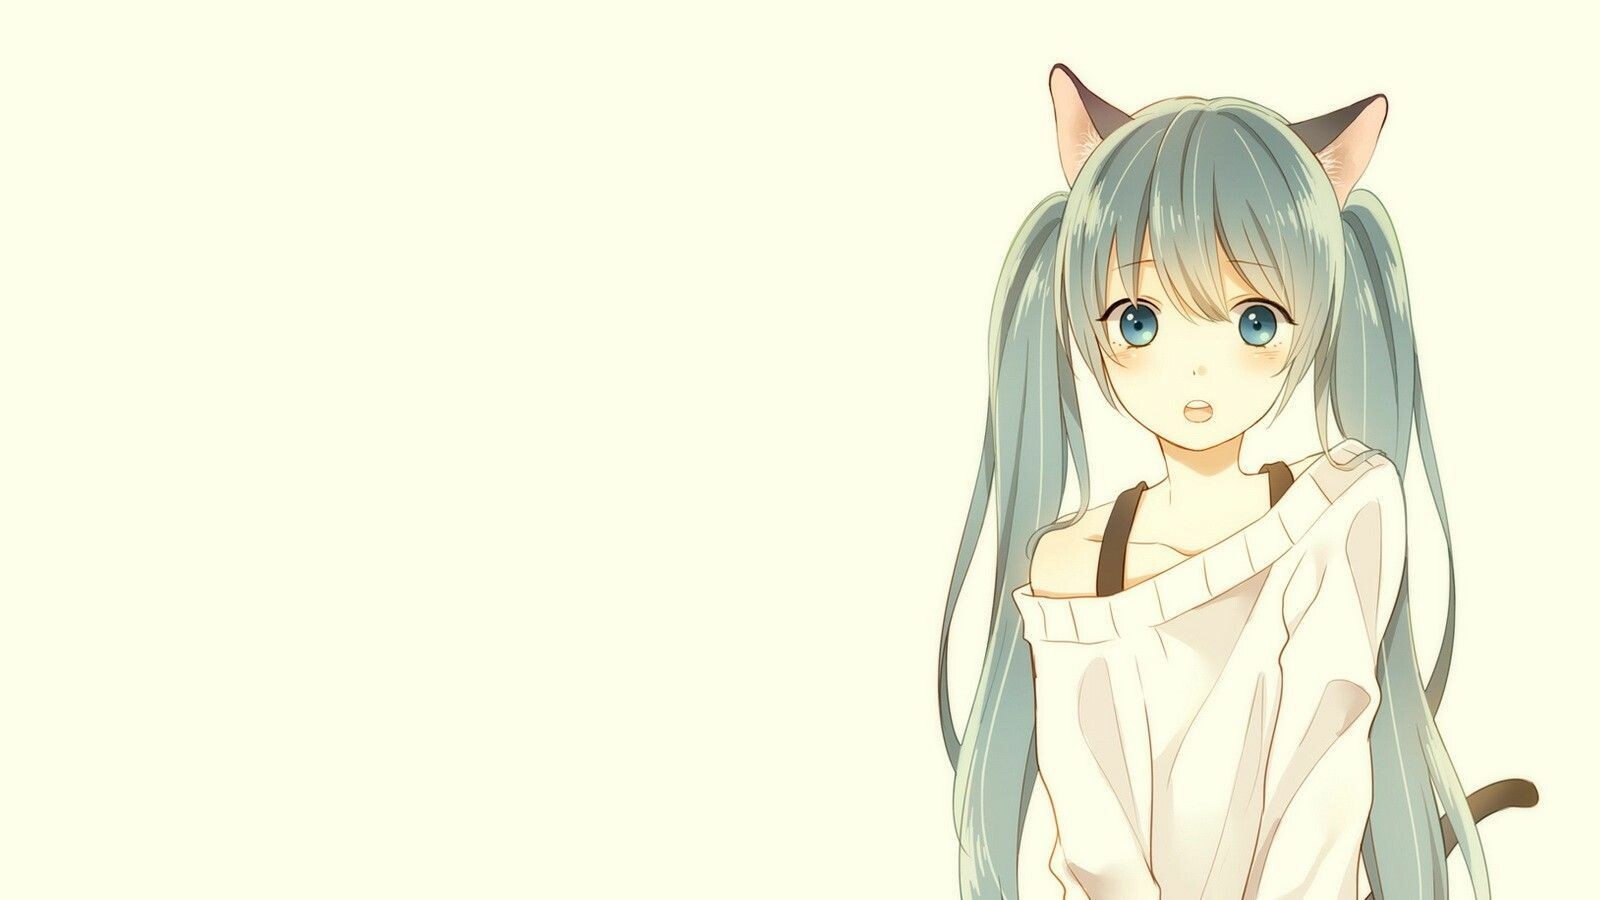 32 Neko Anime Wallpapers Hd 4k 5k For Pc And Mobile Download Free Images For Iphone Android